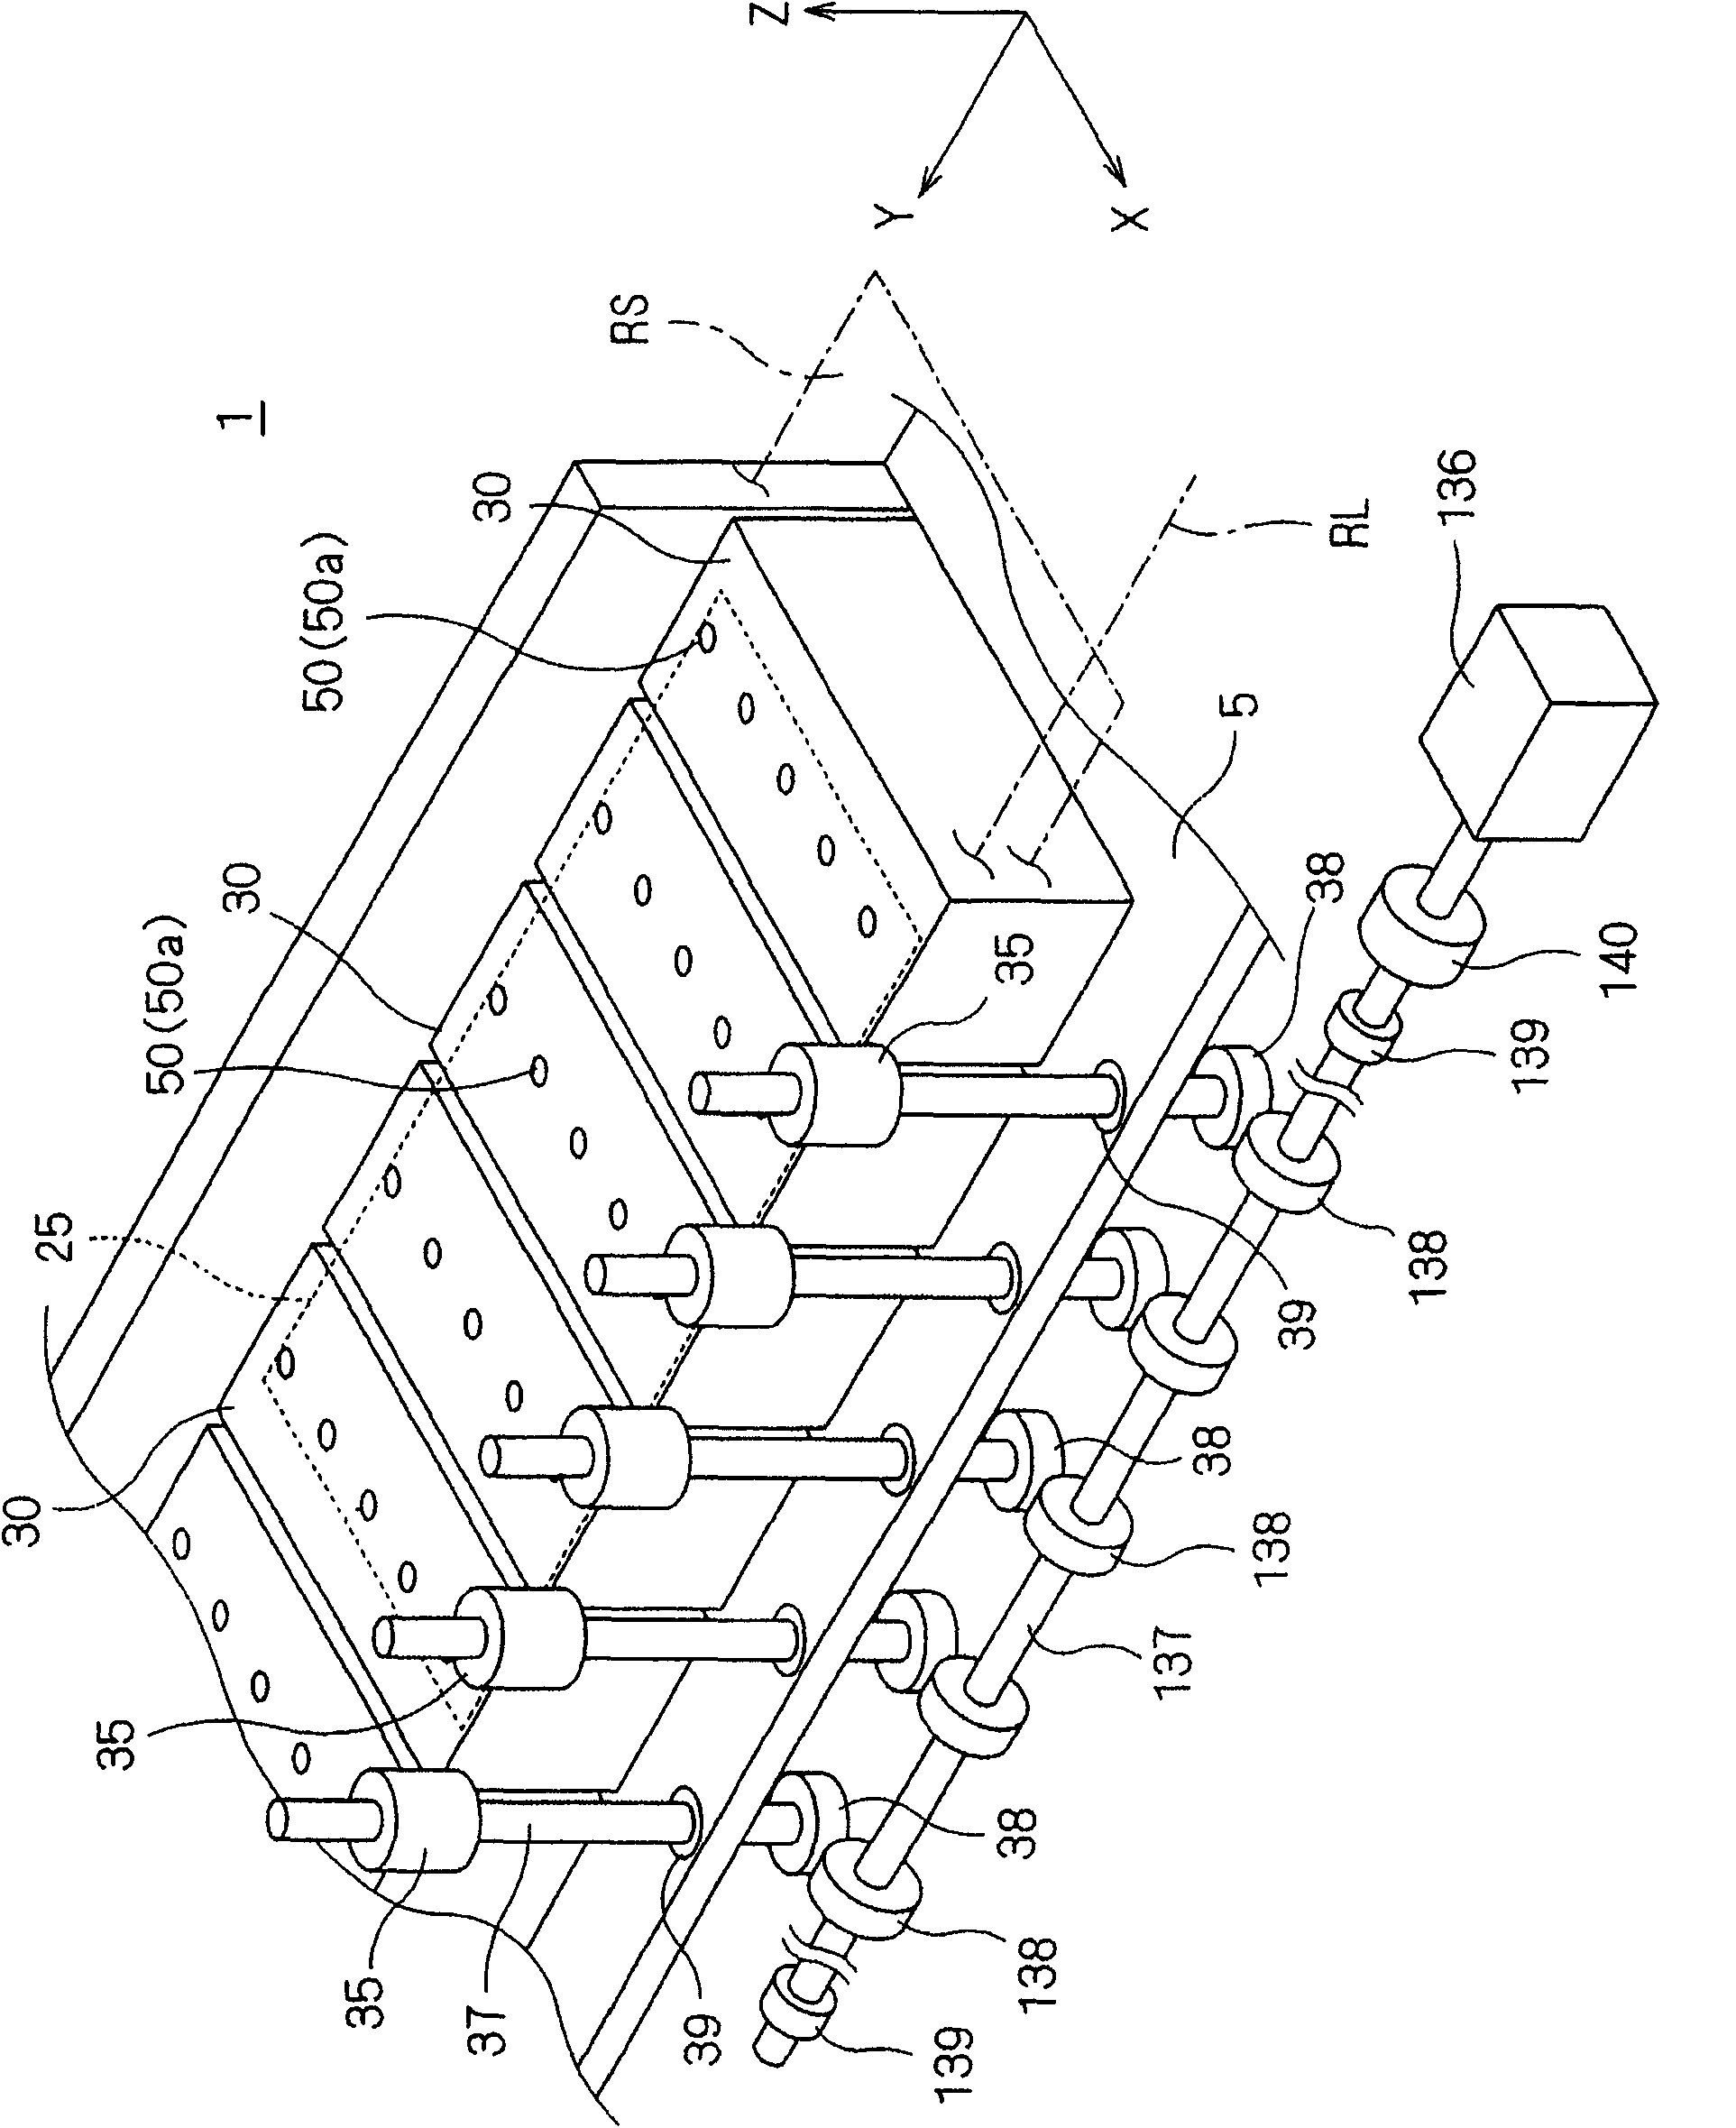 Apparatus for conveying substrates, method and apparatus for locating substrates